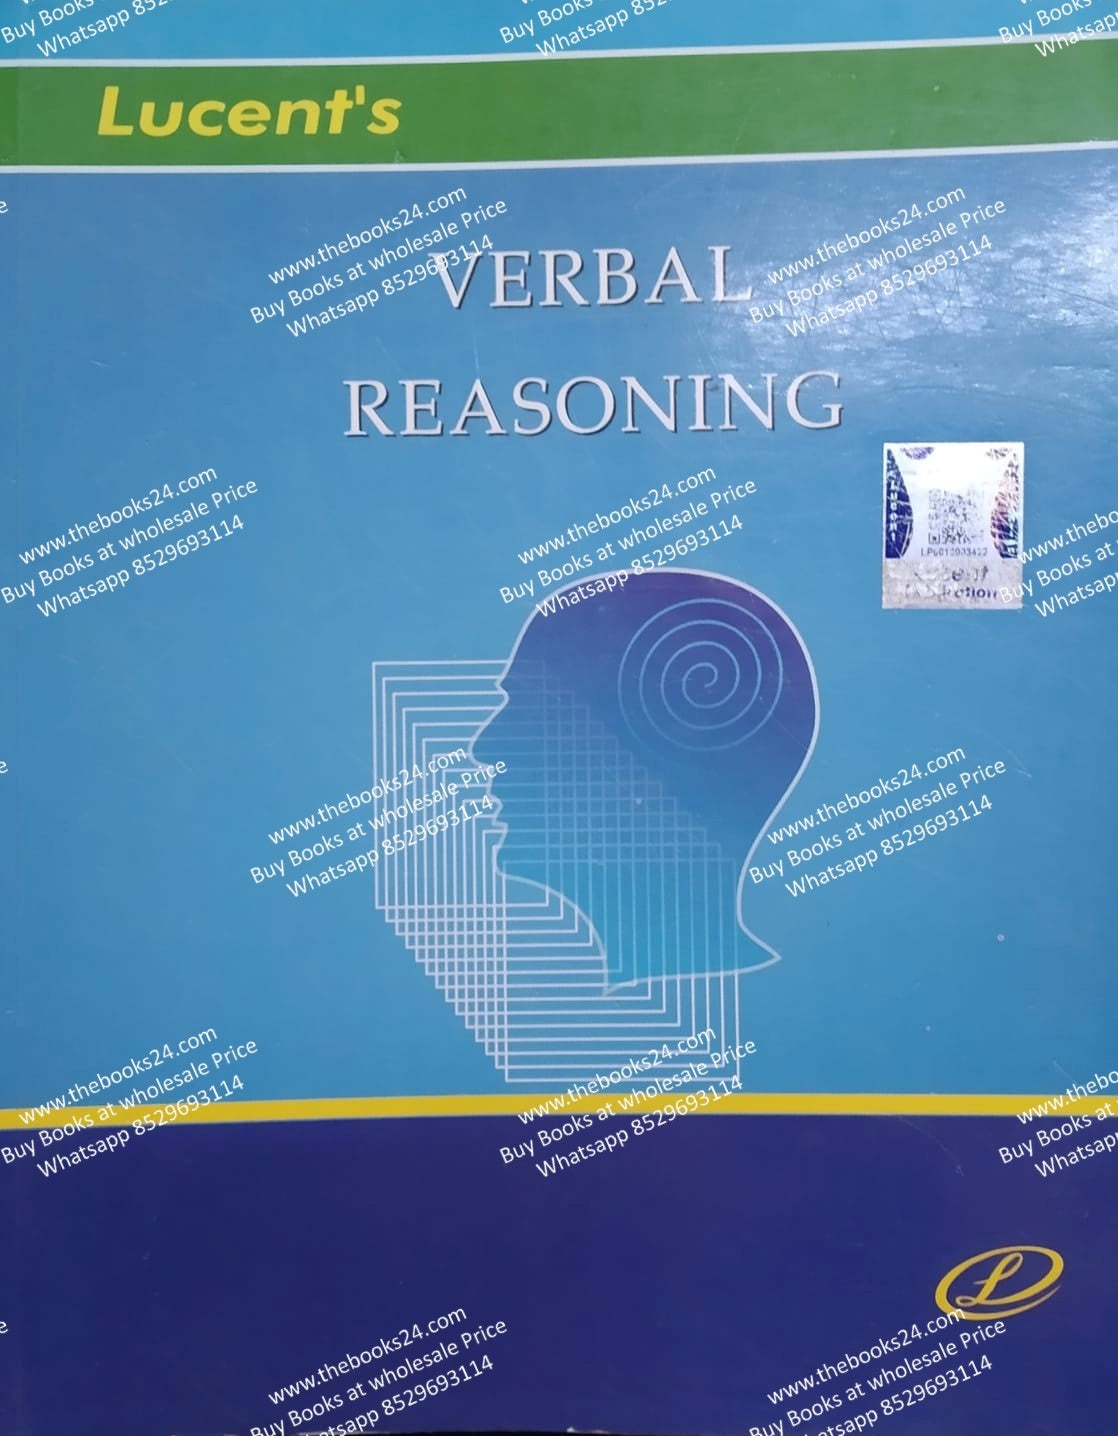 Lucent's Verbal Reasoning